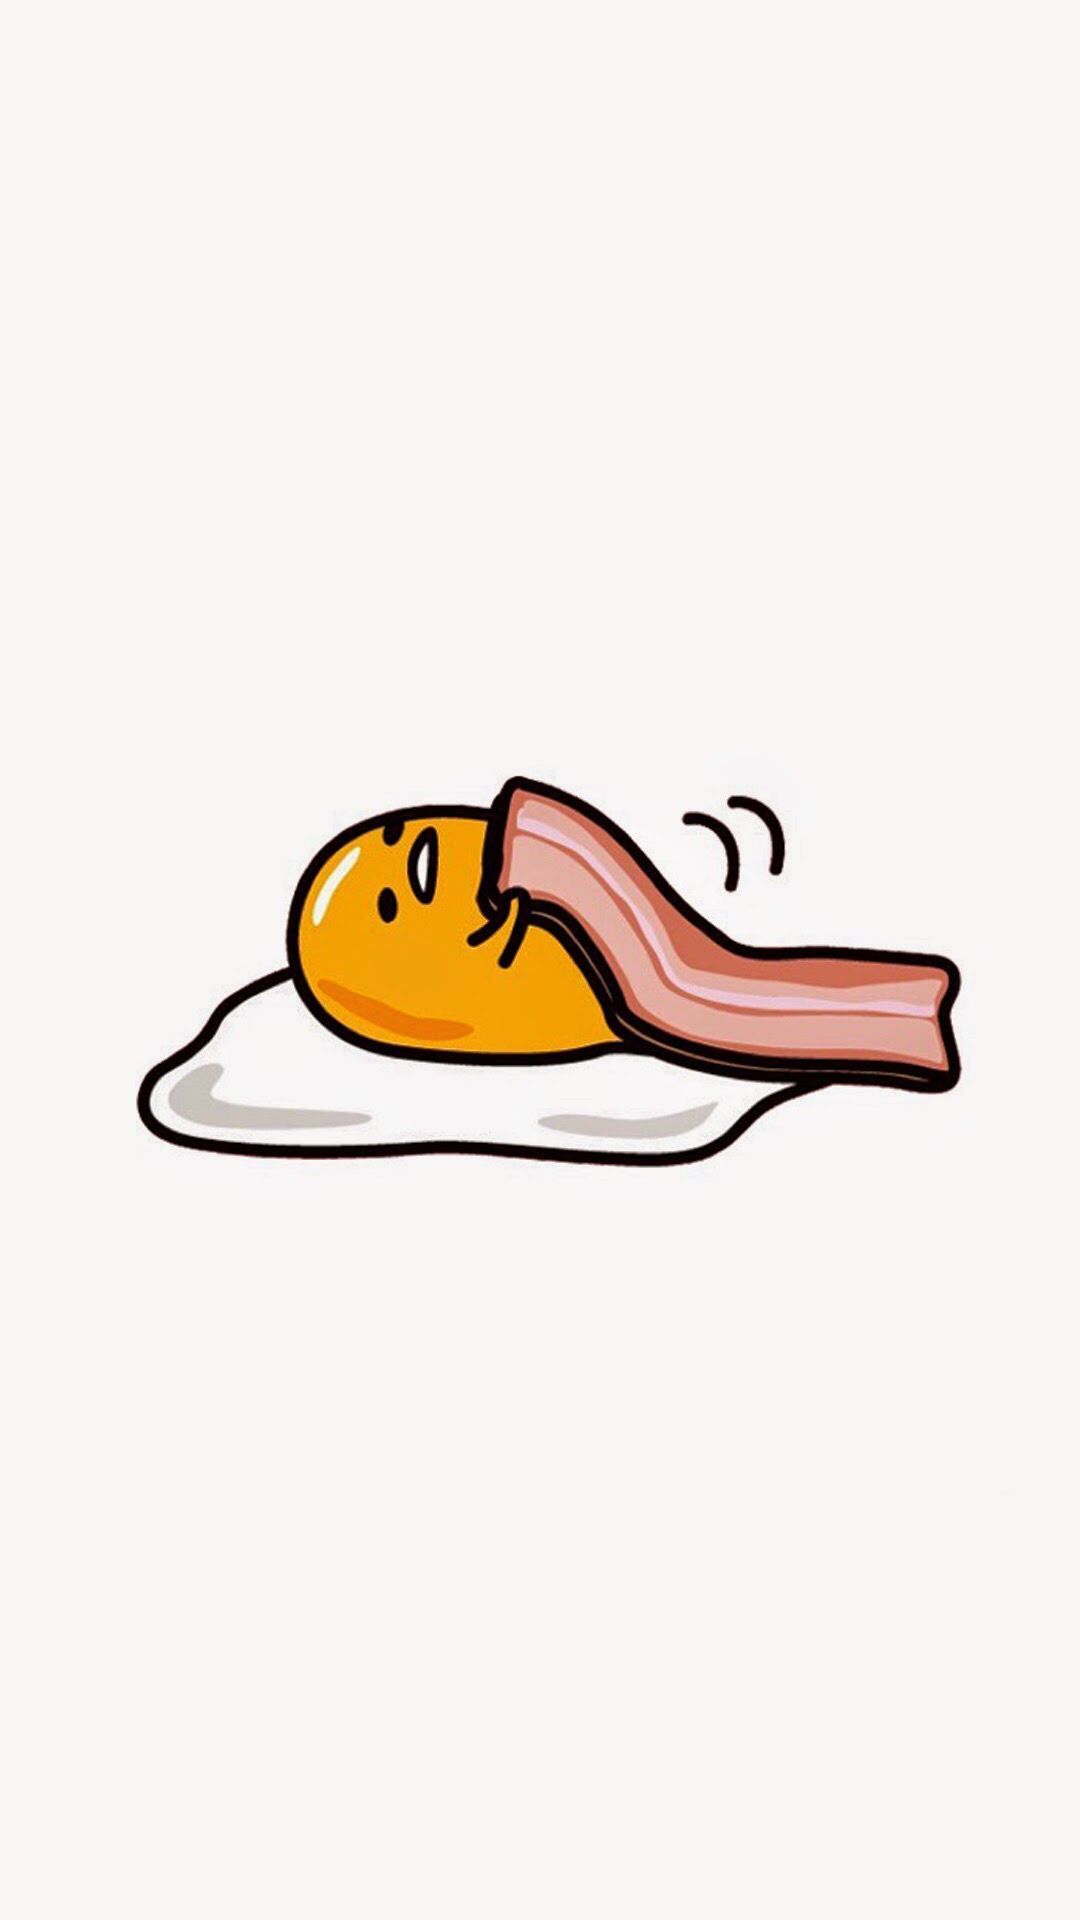 A cartoon of an egg with bacon on it - Egg